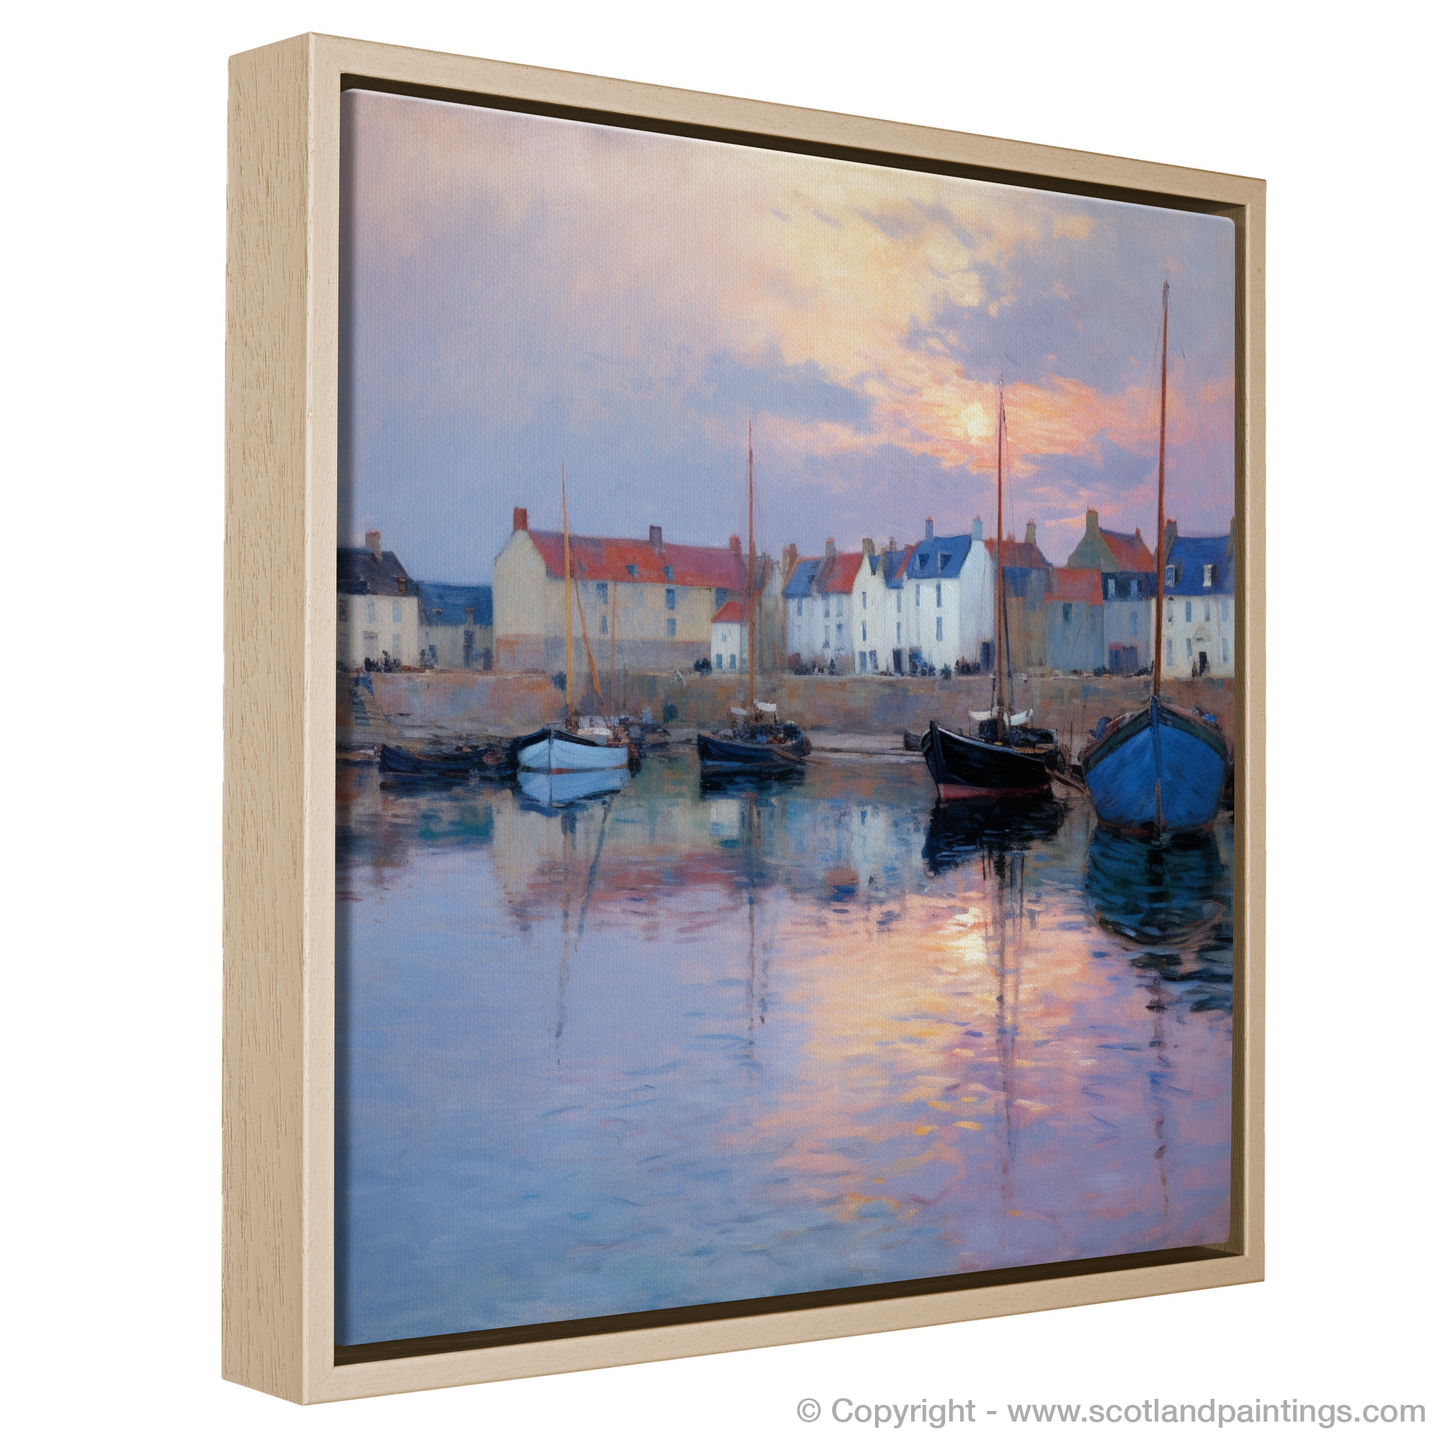 Dusk at Pittenweem Harbour: An Impressionistic Ode to Scottish Serenity